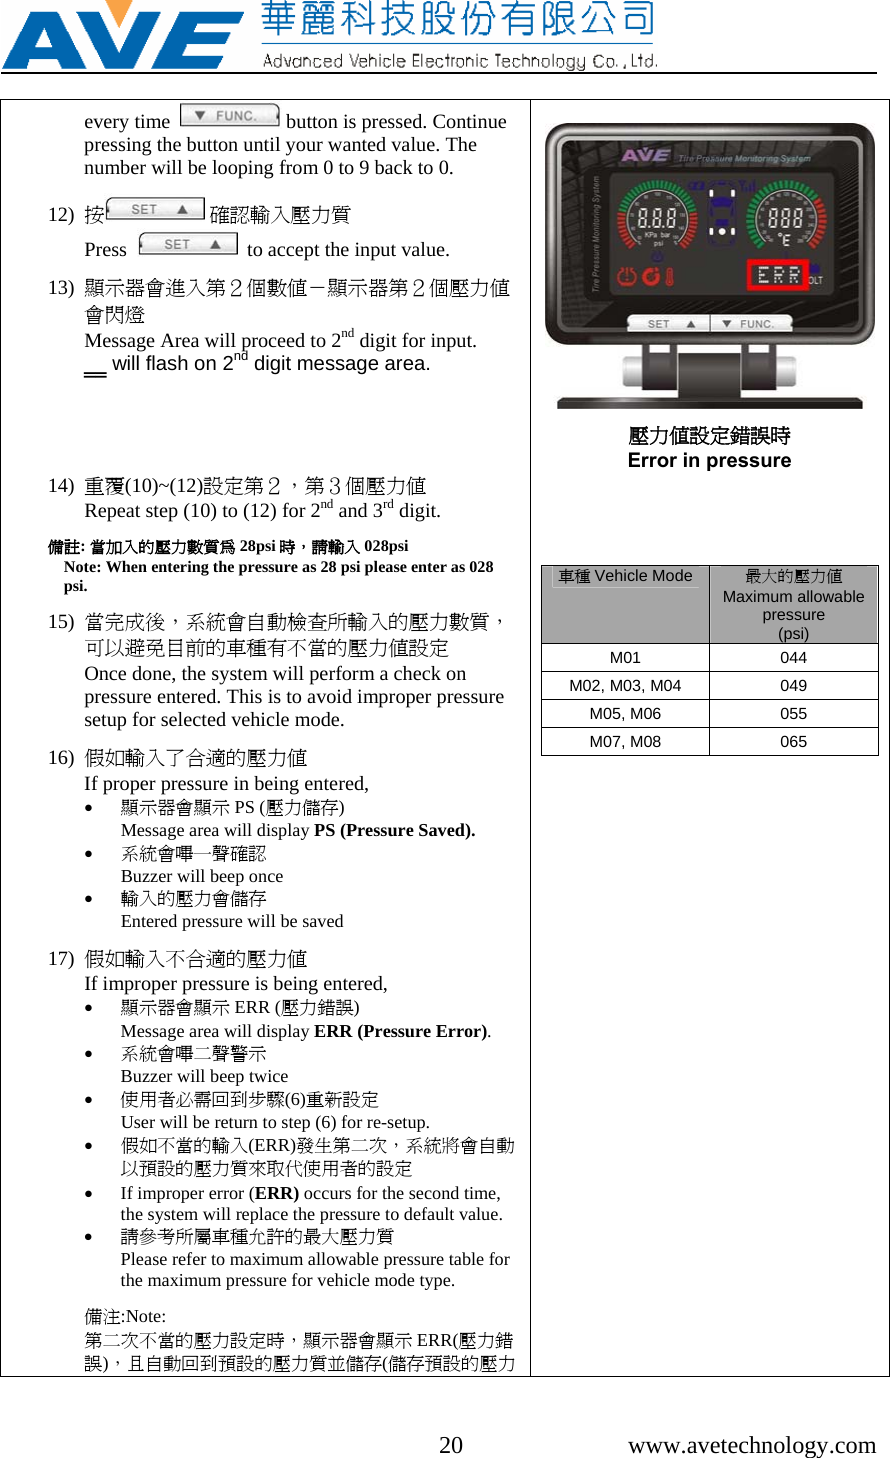     20 www.avetechnology.com every time    button is pressed. Continue pressing the button until your wanted value. The number will be looping from 0 to 9 back to 0.    12) 按 確認輸入壓力質                                   Press     to accept the input value.  13) 顯示器會進入第２個數值－顯示器第２個壓力值會閃燈                   Message Area will proceed to 2nd digit for input.  ‗‗ will flash on 2nd digit message area.      14) 重覆(10)~(12)設定第２，第３個壓力值                Repeat step (10) to (12) for 2nd and 3rd digit.  備註: 當加入的壓力數質為 28psi 時，請輸入 028psi                         Note: When entering the pressure as 28 psi please enter as 028 psi.  15) 當完成後，系統會自動檢查所輸入的壓力數質，可以避免目前的車種有不當的壓力值設定              Once done, the system will perform a check on pressure entered. This is to avoid improper pressure setup for selected vehicle mode.  16) 假如輸入了合適的壓力值                                     If proper pressure in being entered,   • 顯示器會顯示 PS (壓力儲存)                                  Message area will display PS (Pressure Saved). • 系統會嗶一聲確認                 Buzzer will beep once  • 輸入的壓力會儲存              Entered pressure will be saved   17) 假如輸入不合適的壓力值                                   If improper pressure is being entered, • 顯示器會顯示 ERR (壓力錯誤)                          Message area will display ERR (Pressure Error). • 系統會嗶二聲警示                                                     Buzzer will beep twice  • 使用者必需回到步驟(6)重新設定       User will be return to step (6) for re-setup. • 假如不當的輸入(ERR)發生第二次，系統將會自動以預設的壓力質來取代使用者的設定 • If improper error (ERR) occurs for the second time, the system will replace the pressure to default value. • 請參考所屬車種允許的最大壓力質                  Please refer to maximum allowable pressure table for the maximum pressure for vehicle mode type.  備注:Note: 第二次不當的壓力設定時，顯示器會顯示 ERR(壓力錯誤)，且自動回到預設的壓力質並儲存(儲存預設的壓力  壓力值設定錯誤時 Error in pressure     車種 Vehicle Mode 最大的壓力值Maximum allowable pressure  (psi) M01 044 M02, M03, M04  049 M05, M06  055 M07, M08  065      